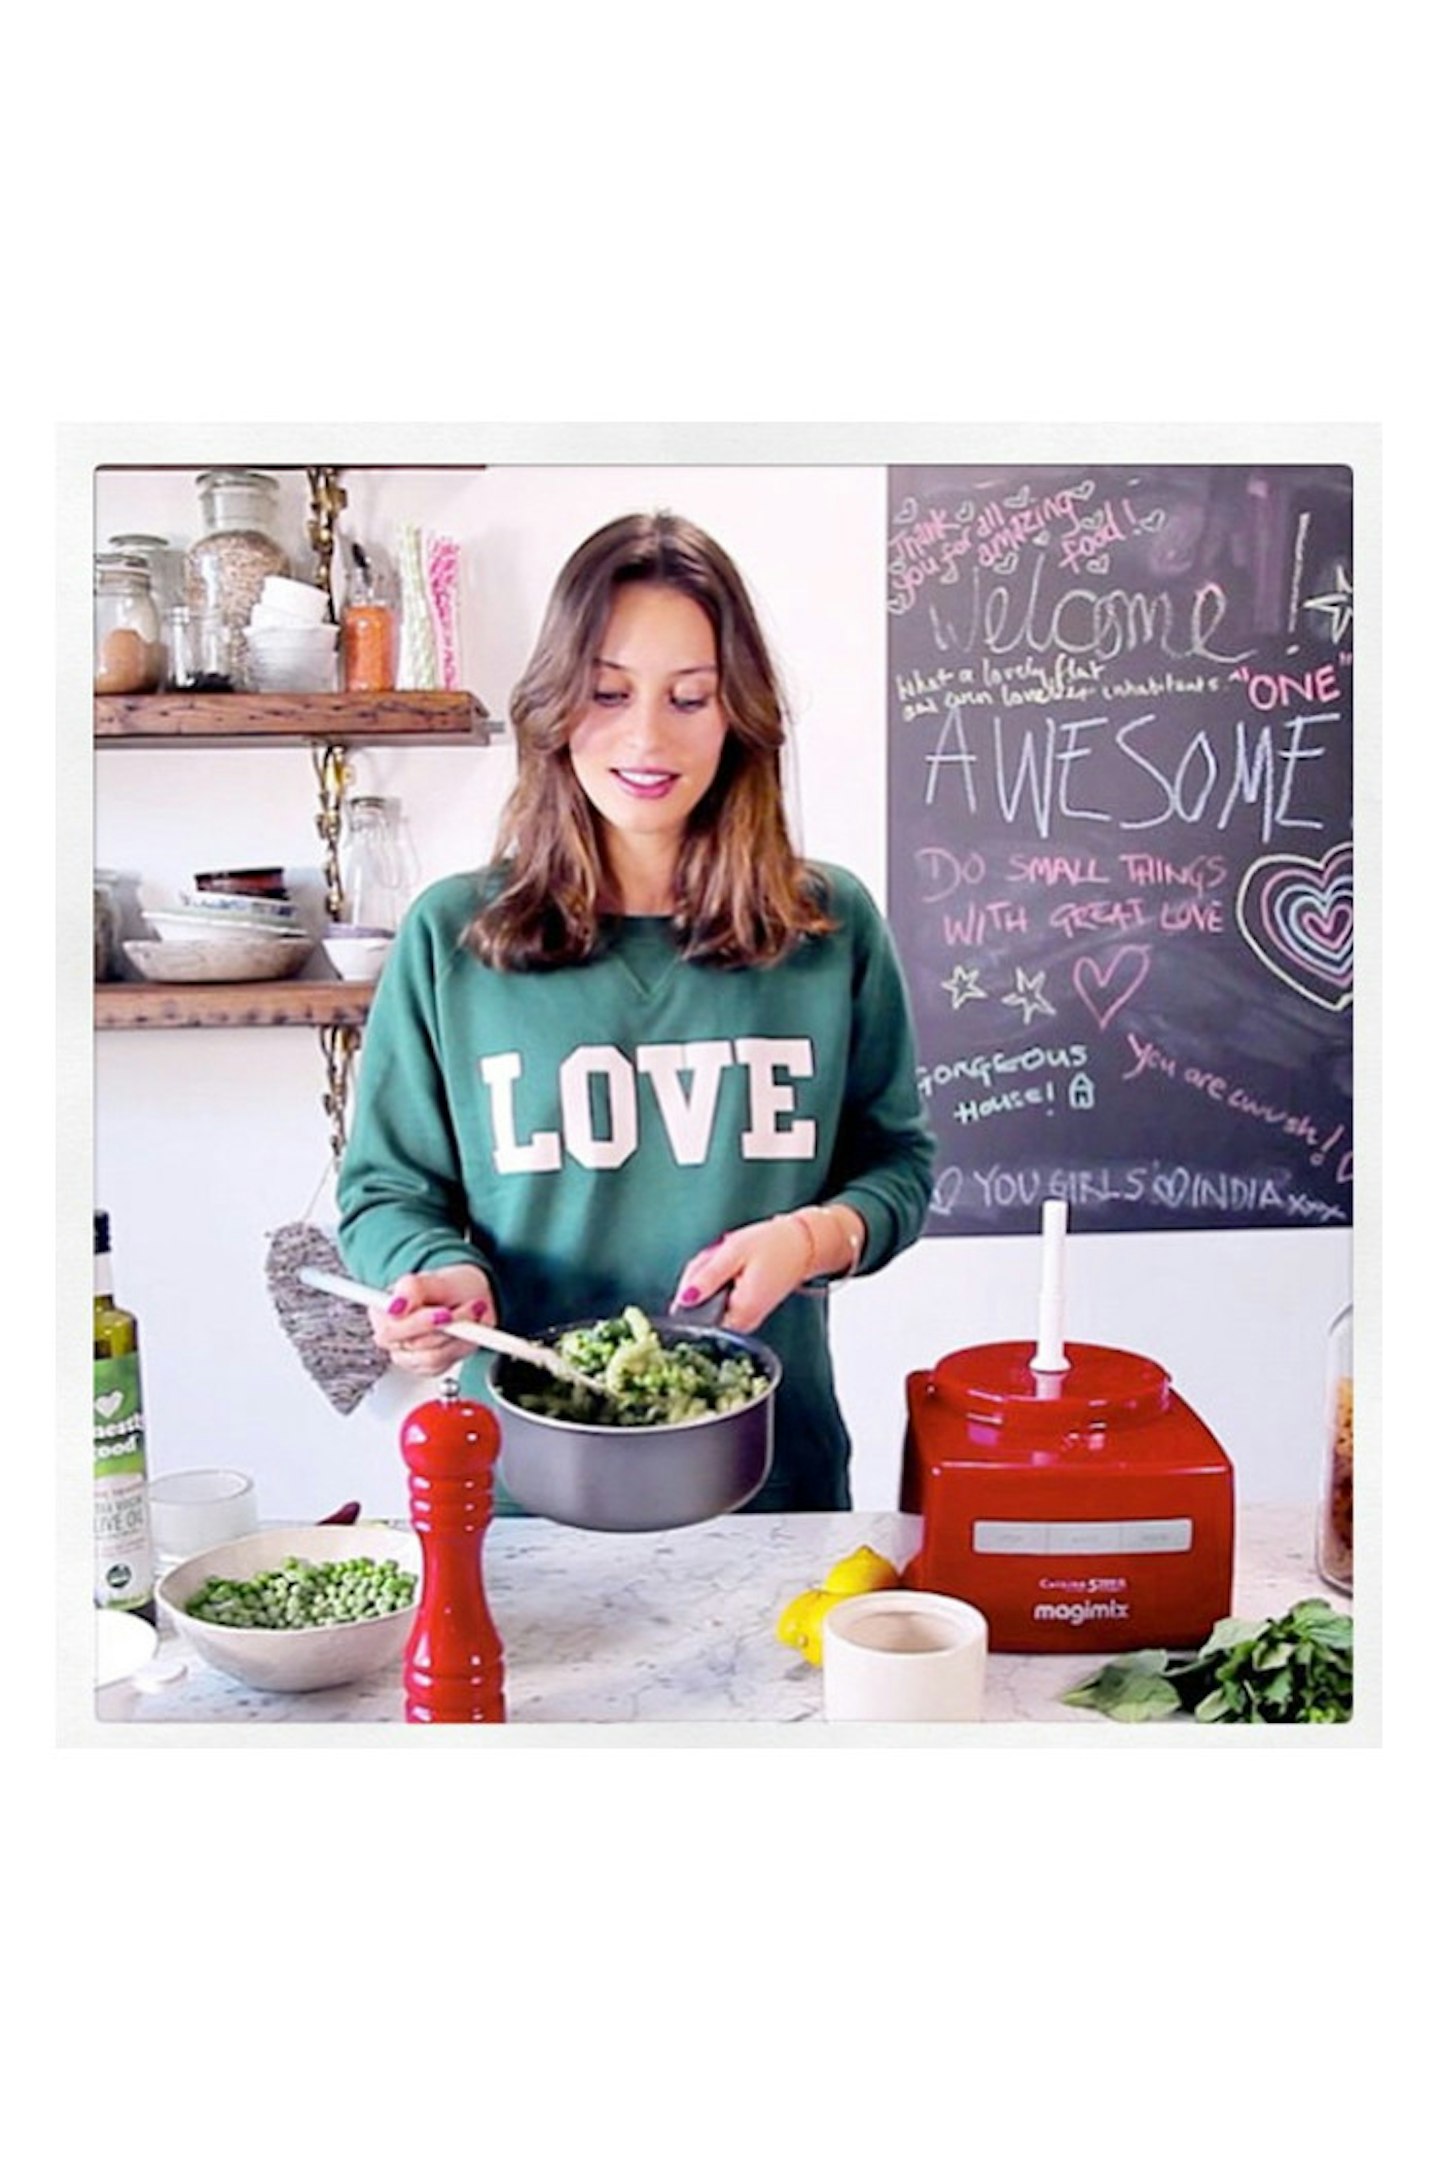 Deliciously Ella, £2.99, available on the App Store for iPhone and iPad